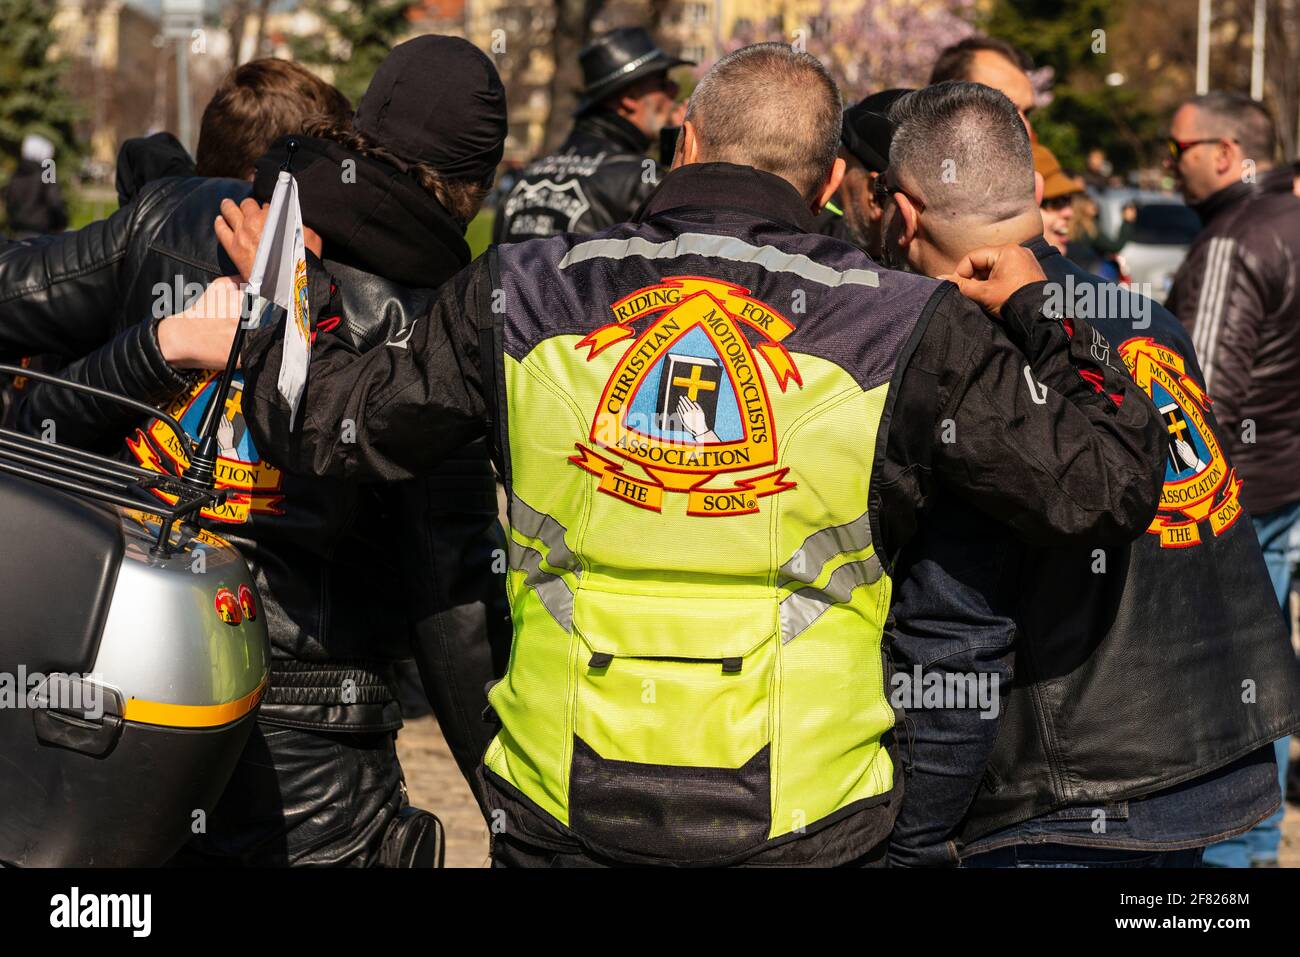 Bikers wearing leather jackets with Christian Motorcyclists Association emblem at the annual motorcycle bike fest gathering in Sofia, Bulgaria, Europe Stock Photo